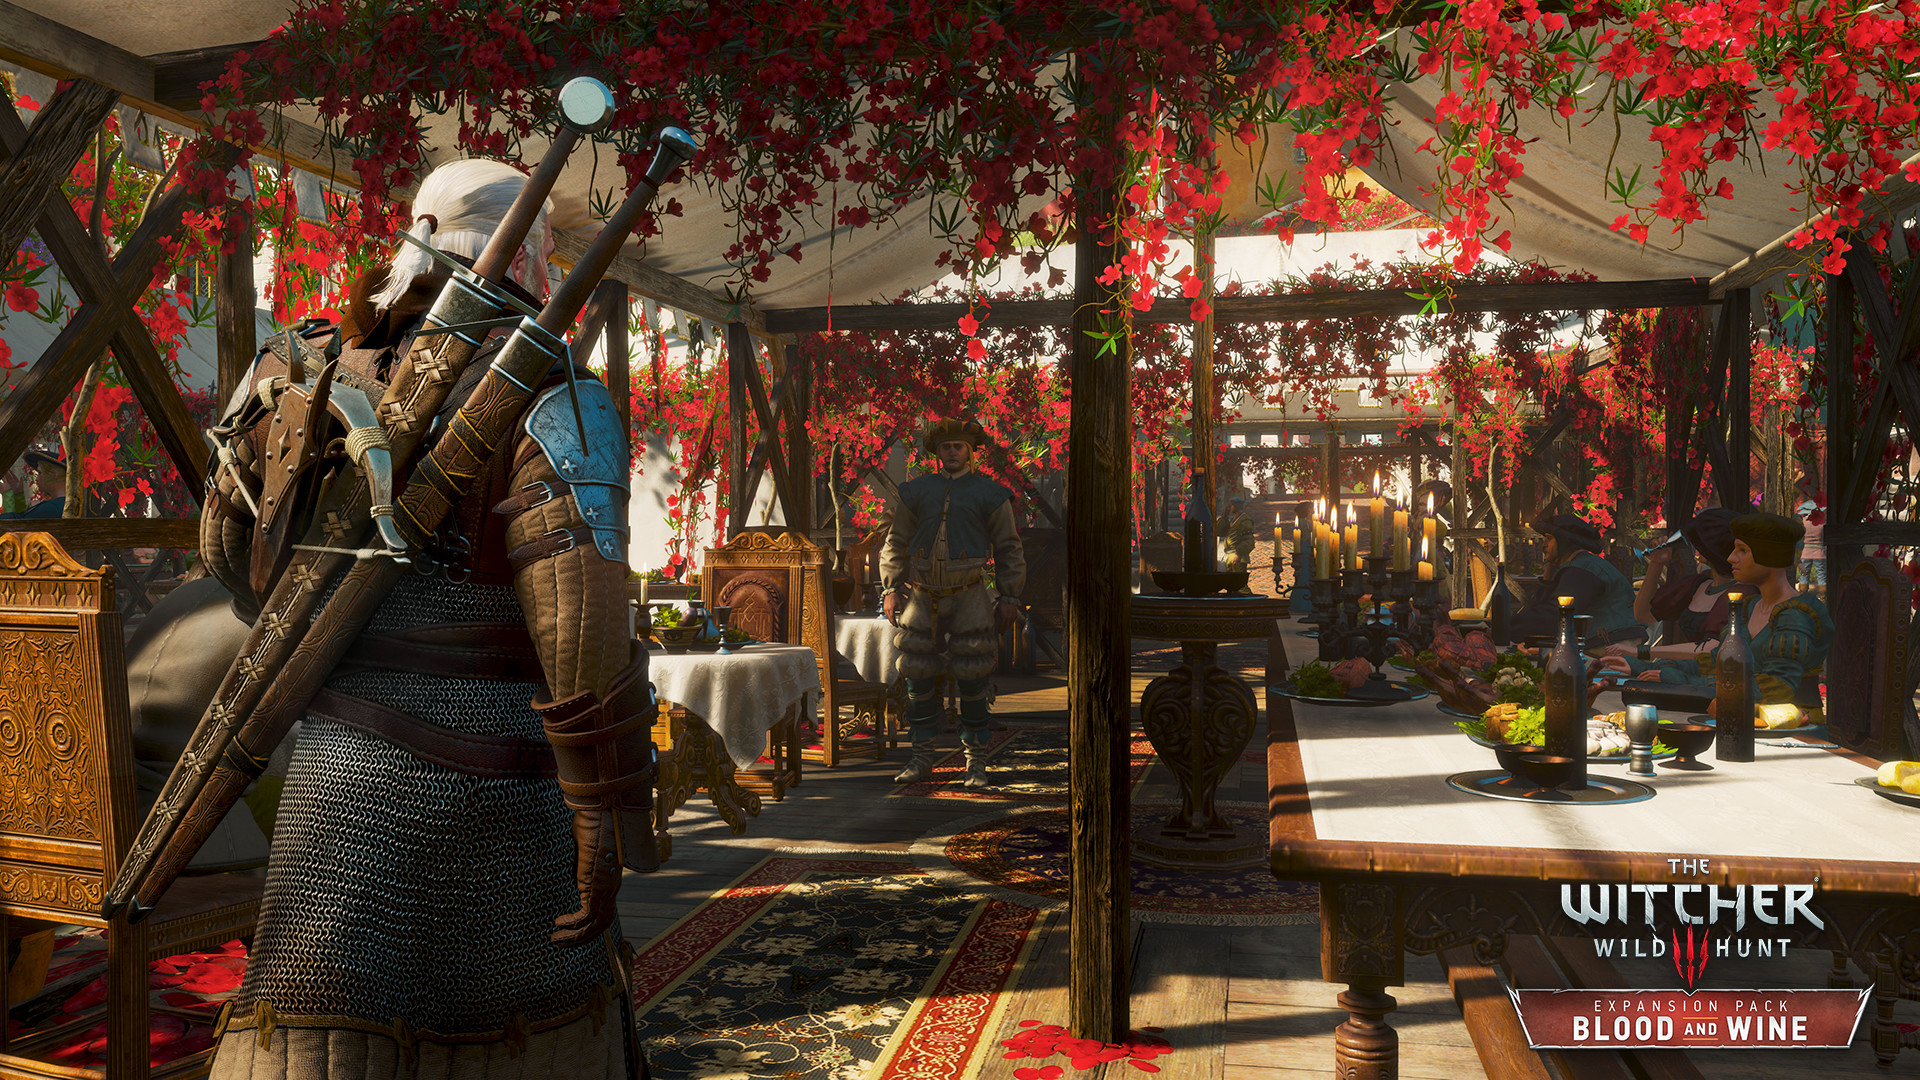 The Witcher 3: Wild Hunt - Expansion Pass screenshot